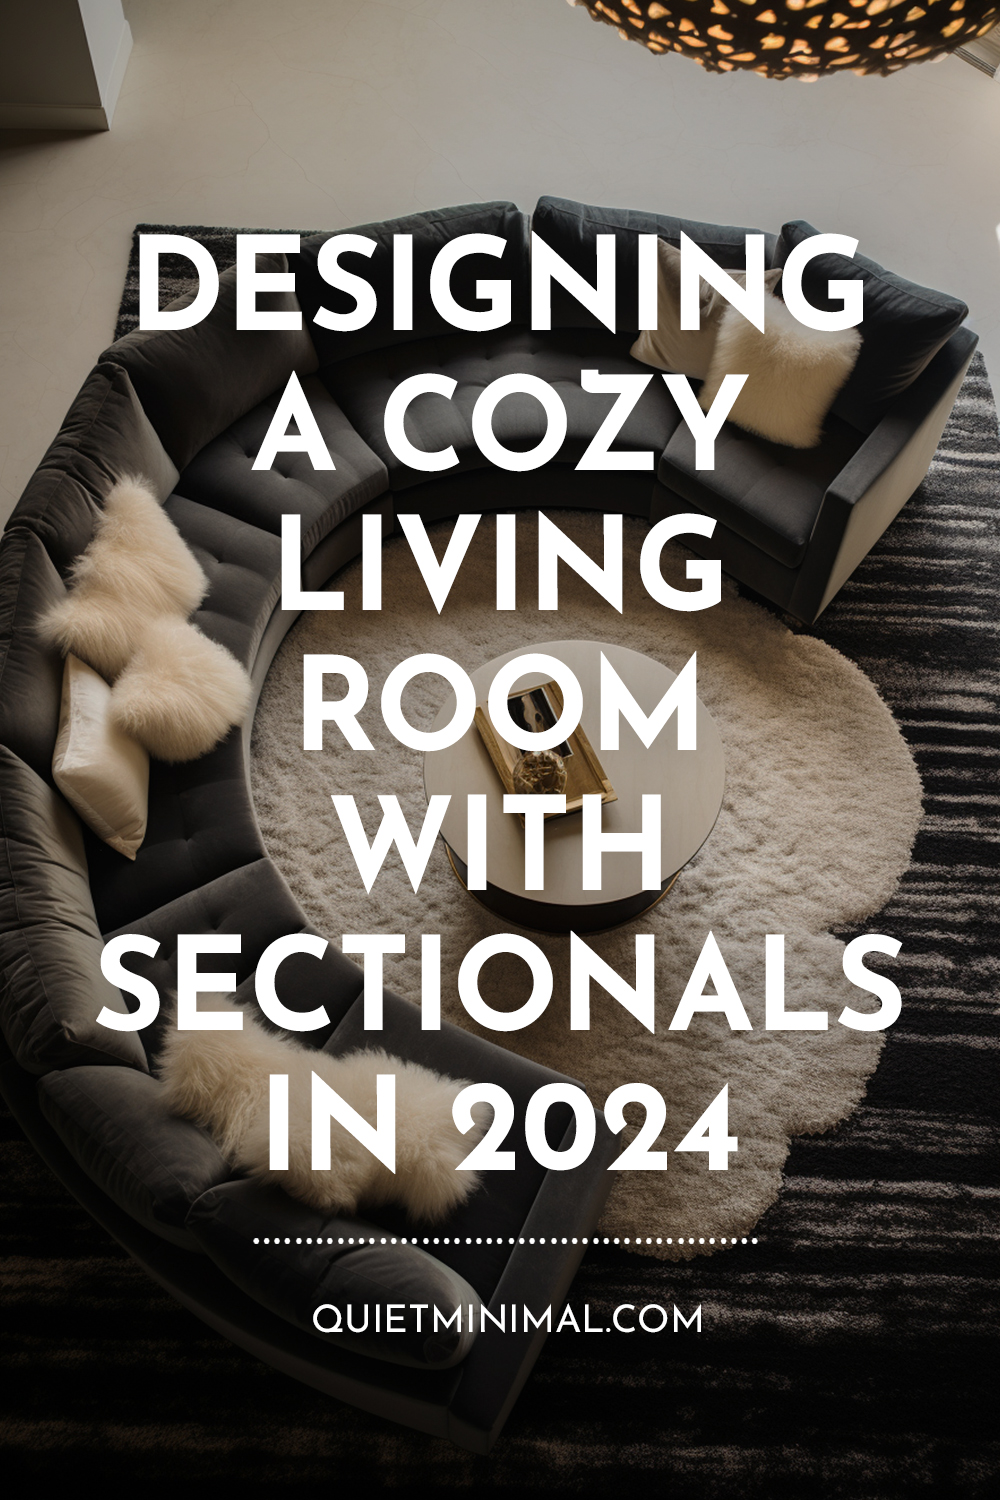 Designing a cozy living room with sectionals in 2014.